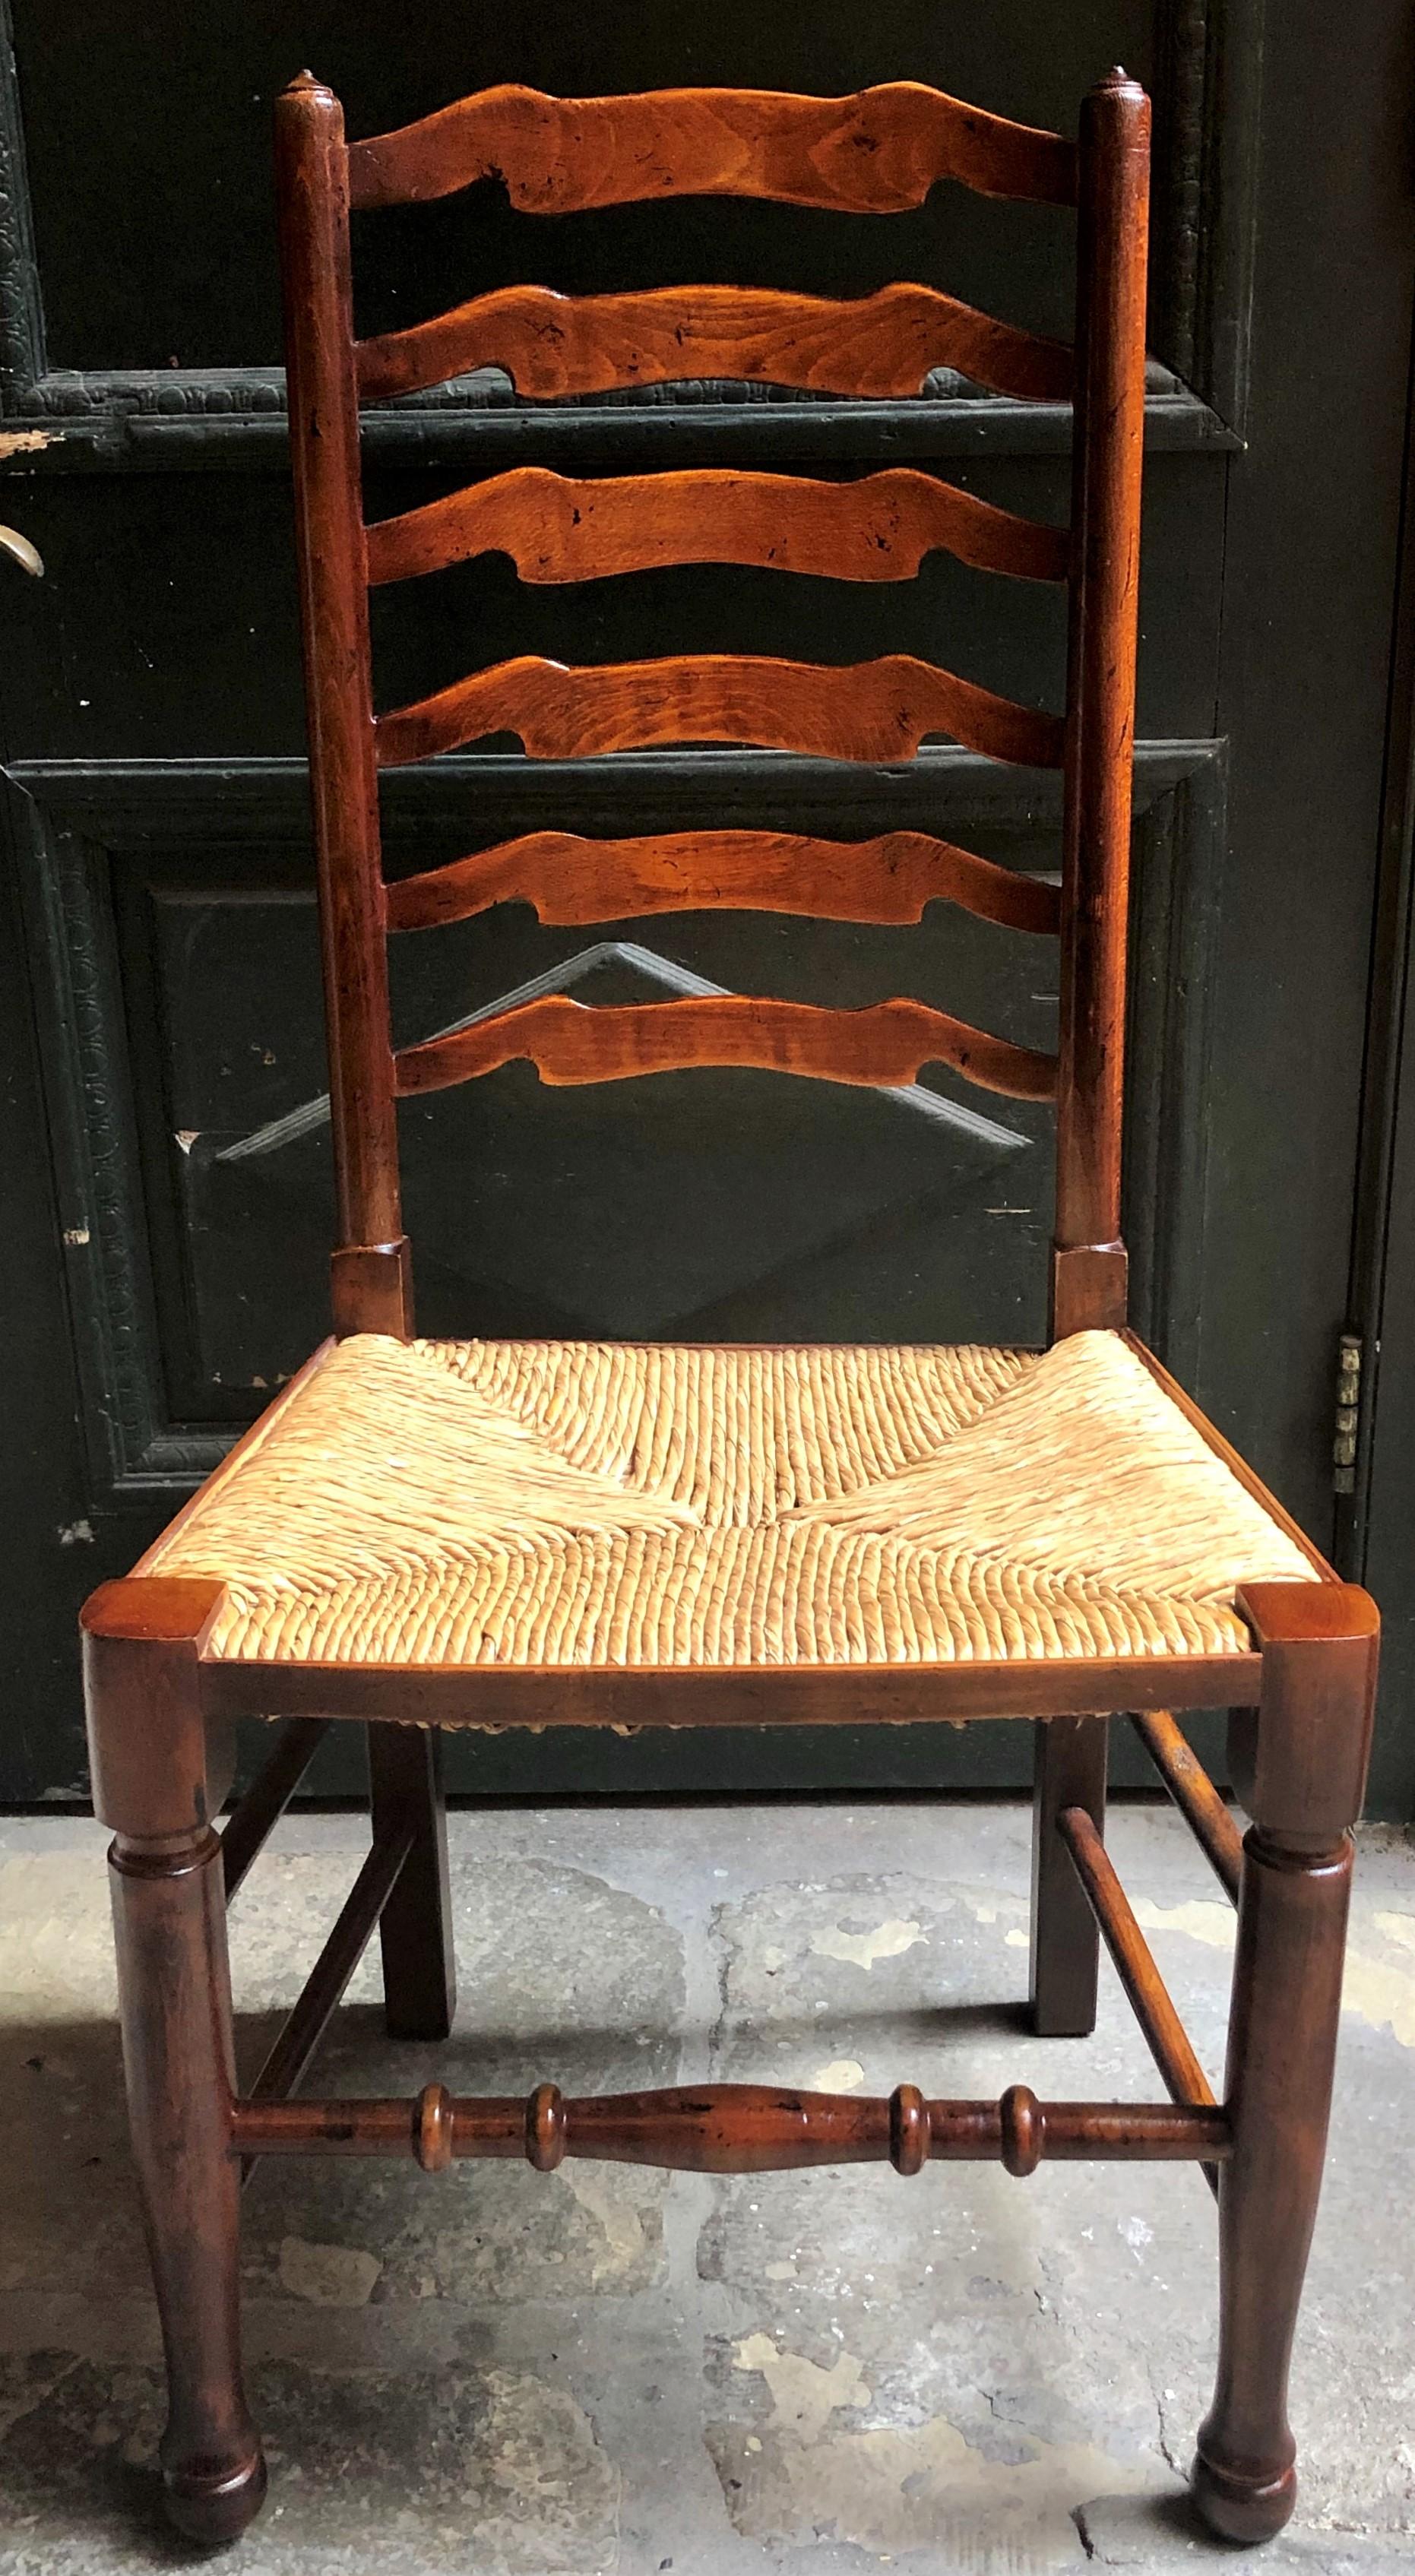 Set of 8 estate English ladder back chairs with rush seats, circa 1940.
6 side chairs and 2 armchairs.